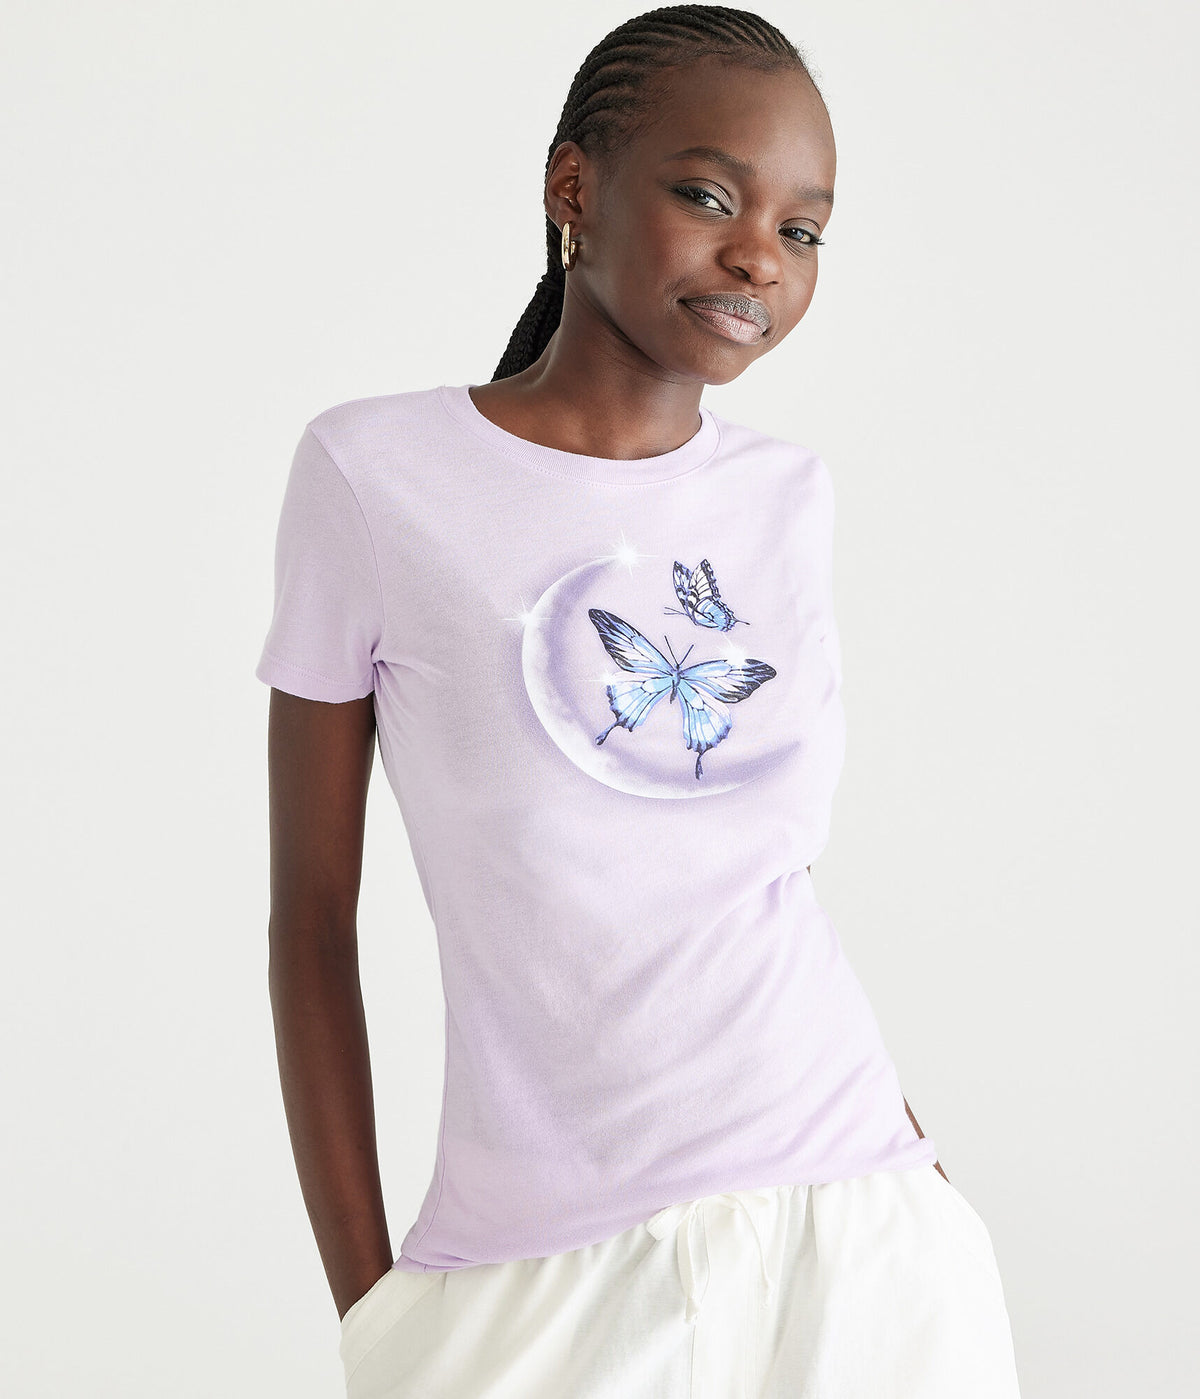 Aeropostale Womens' Butterfly Moon Graphic Tee -  - Size XL - Cotton - Teen Fashion & Clothing Light Purple